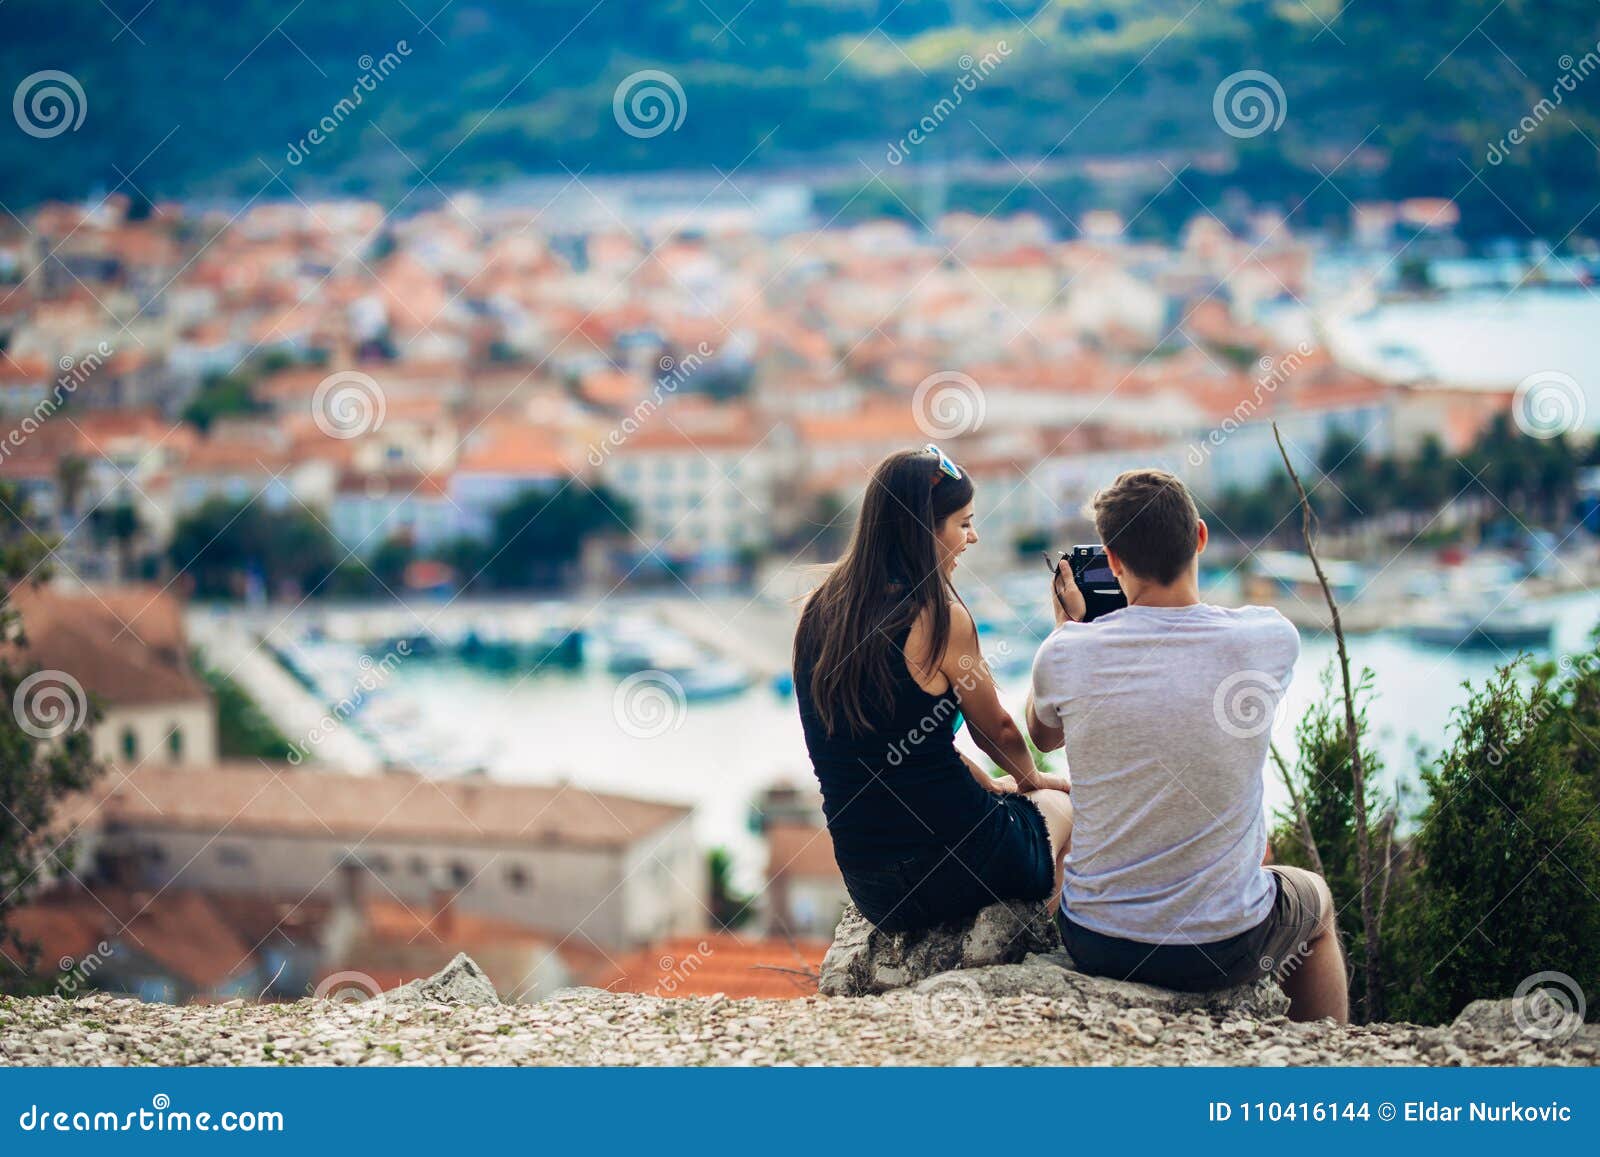 young couple travelling and visiting europe.summer touring europe and mediterranean culture.colourful streets,cityscape